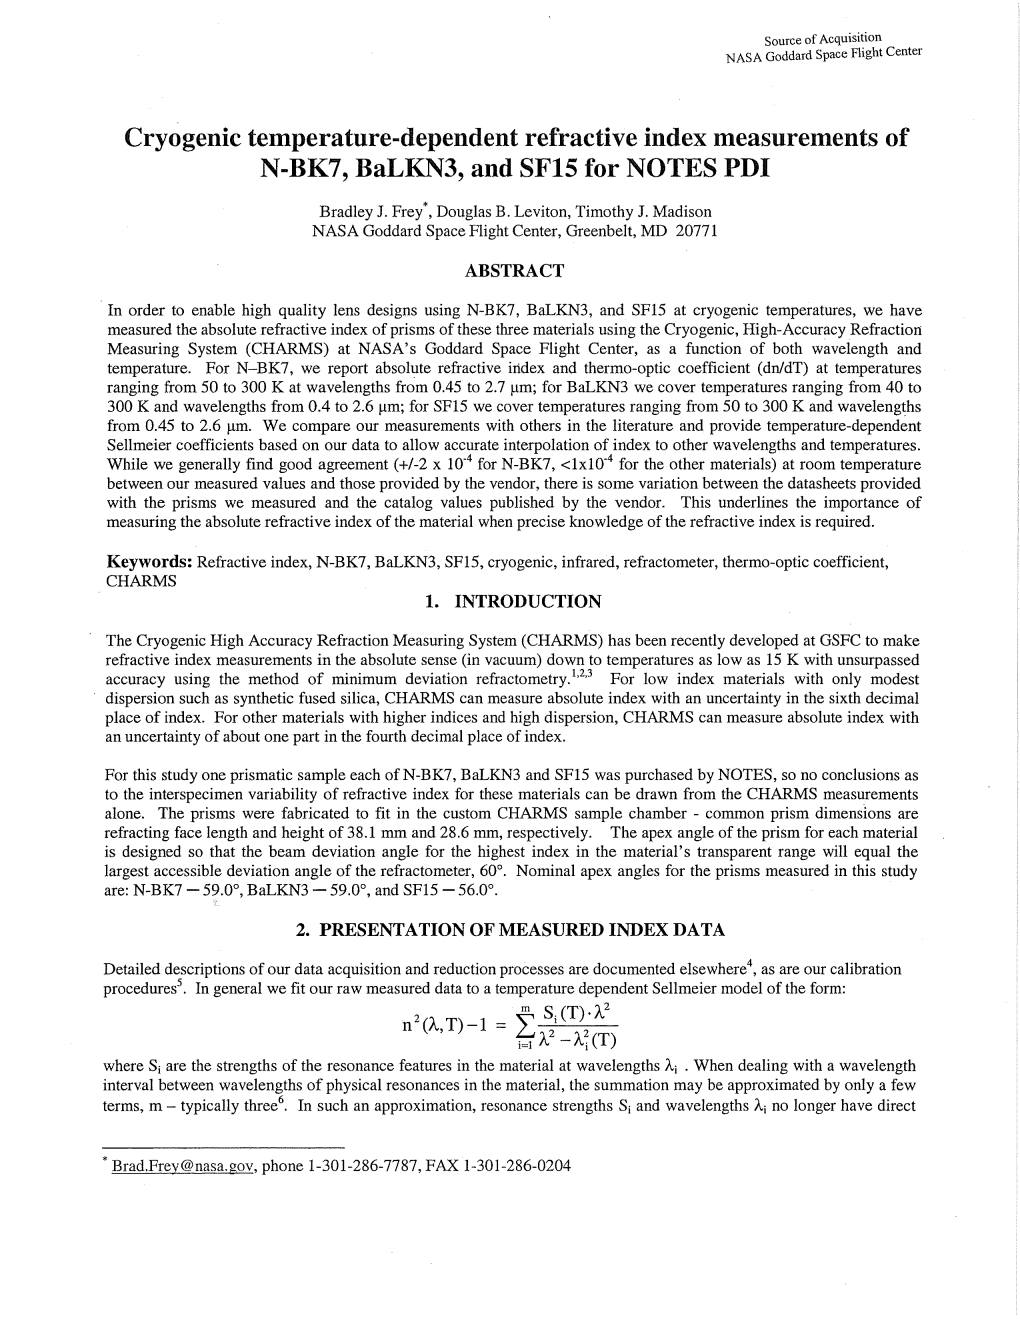 Cryogenic Temperature-Dependent Refractive Index Measurements of N-BK7, Bal 3, and SF15 for NOTES PDT